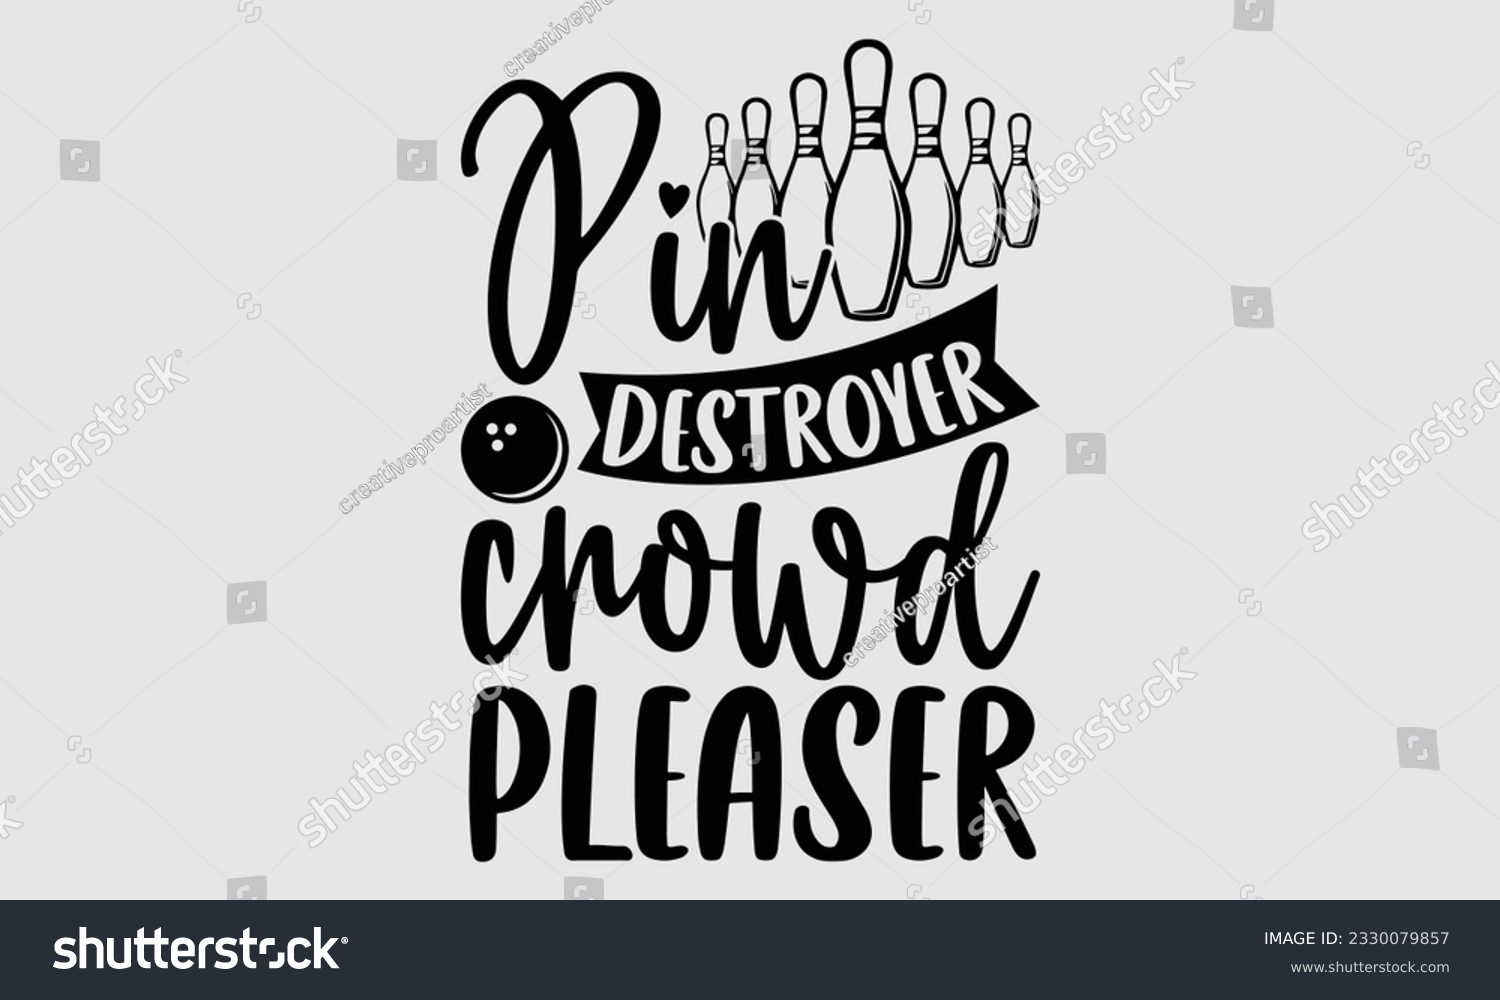 SVG of Pin Destroyer Crowd Pleaser- Bowling t-shirt design, Handmade calligraphy vector Illustration for prints on SVG and bags, posters, greeting card template EPS svg